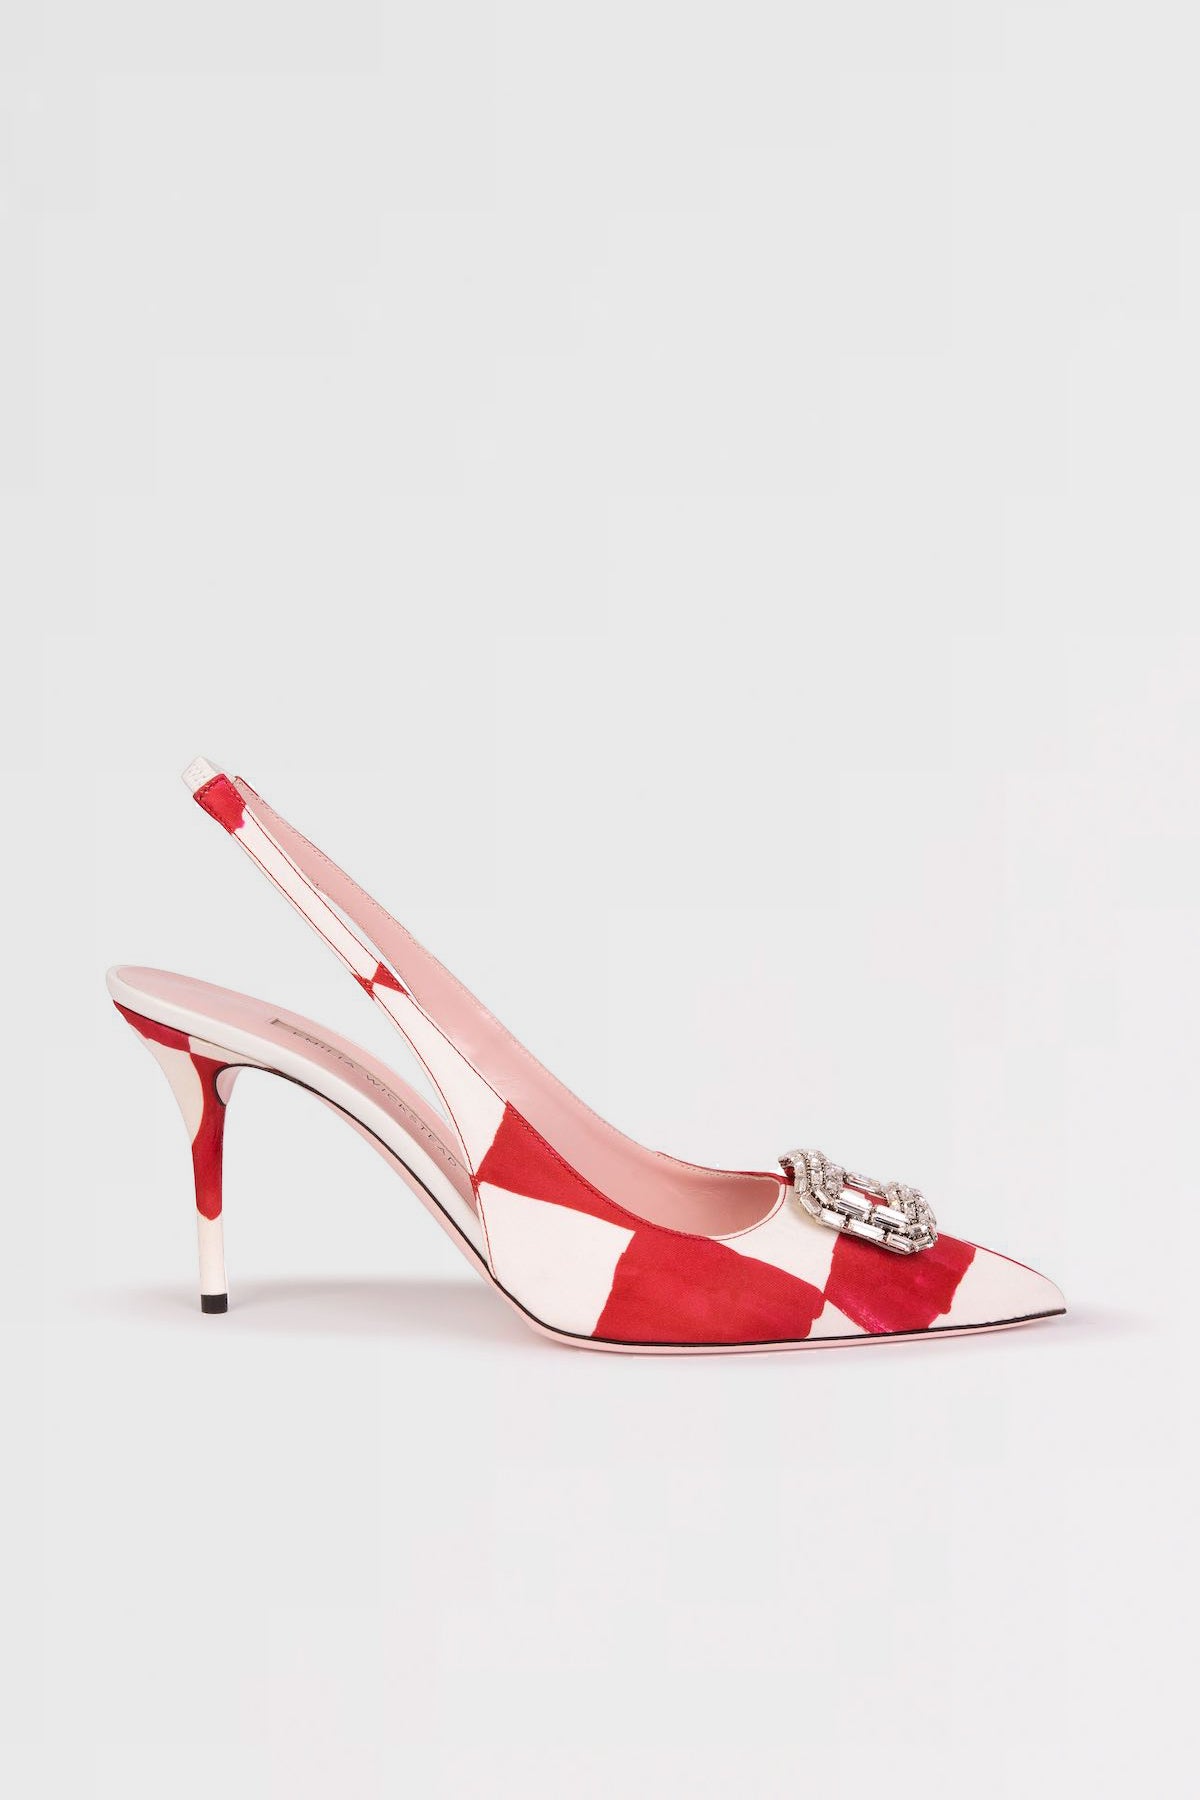 Paloma High Heels | Red Checkerboard Print Sling-Back Heels with ...